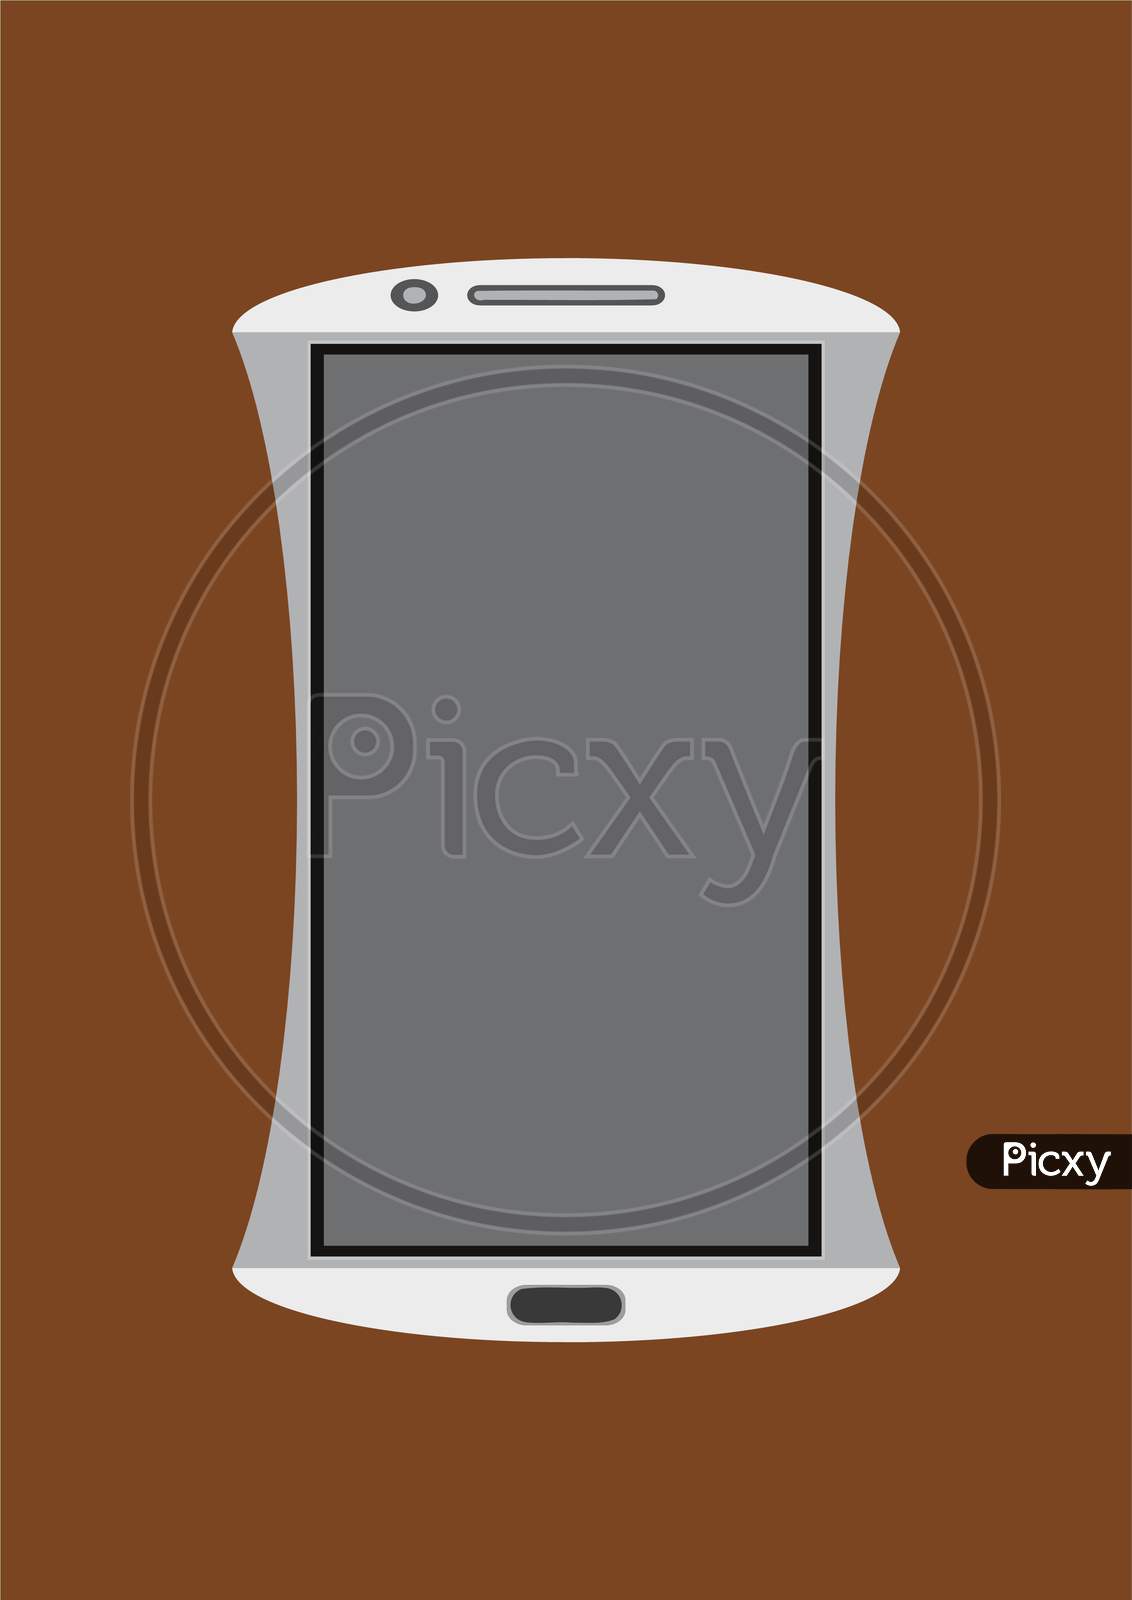 Image Of A White Color, Gray Shade, Curve Shape Smartphone Graphic Design Having In Brown Background.